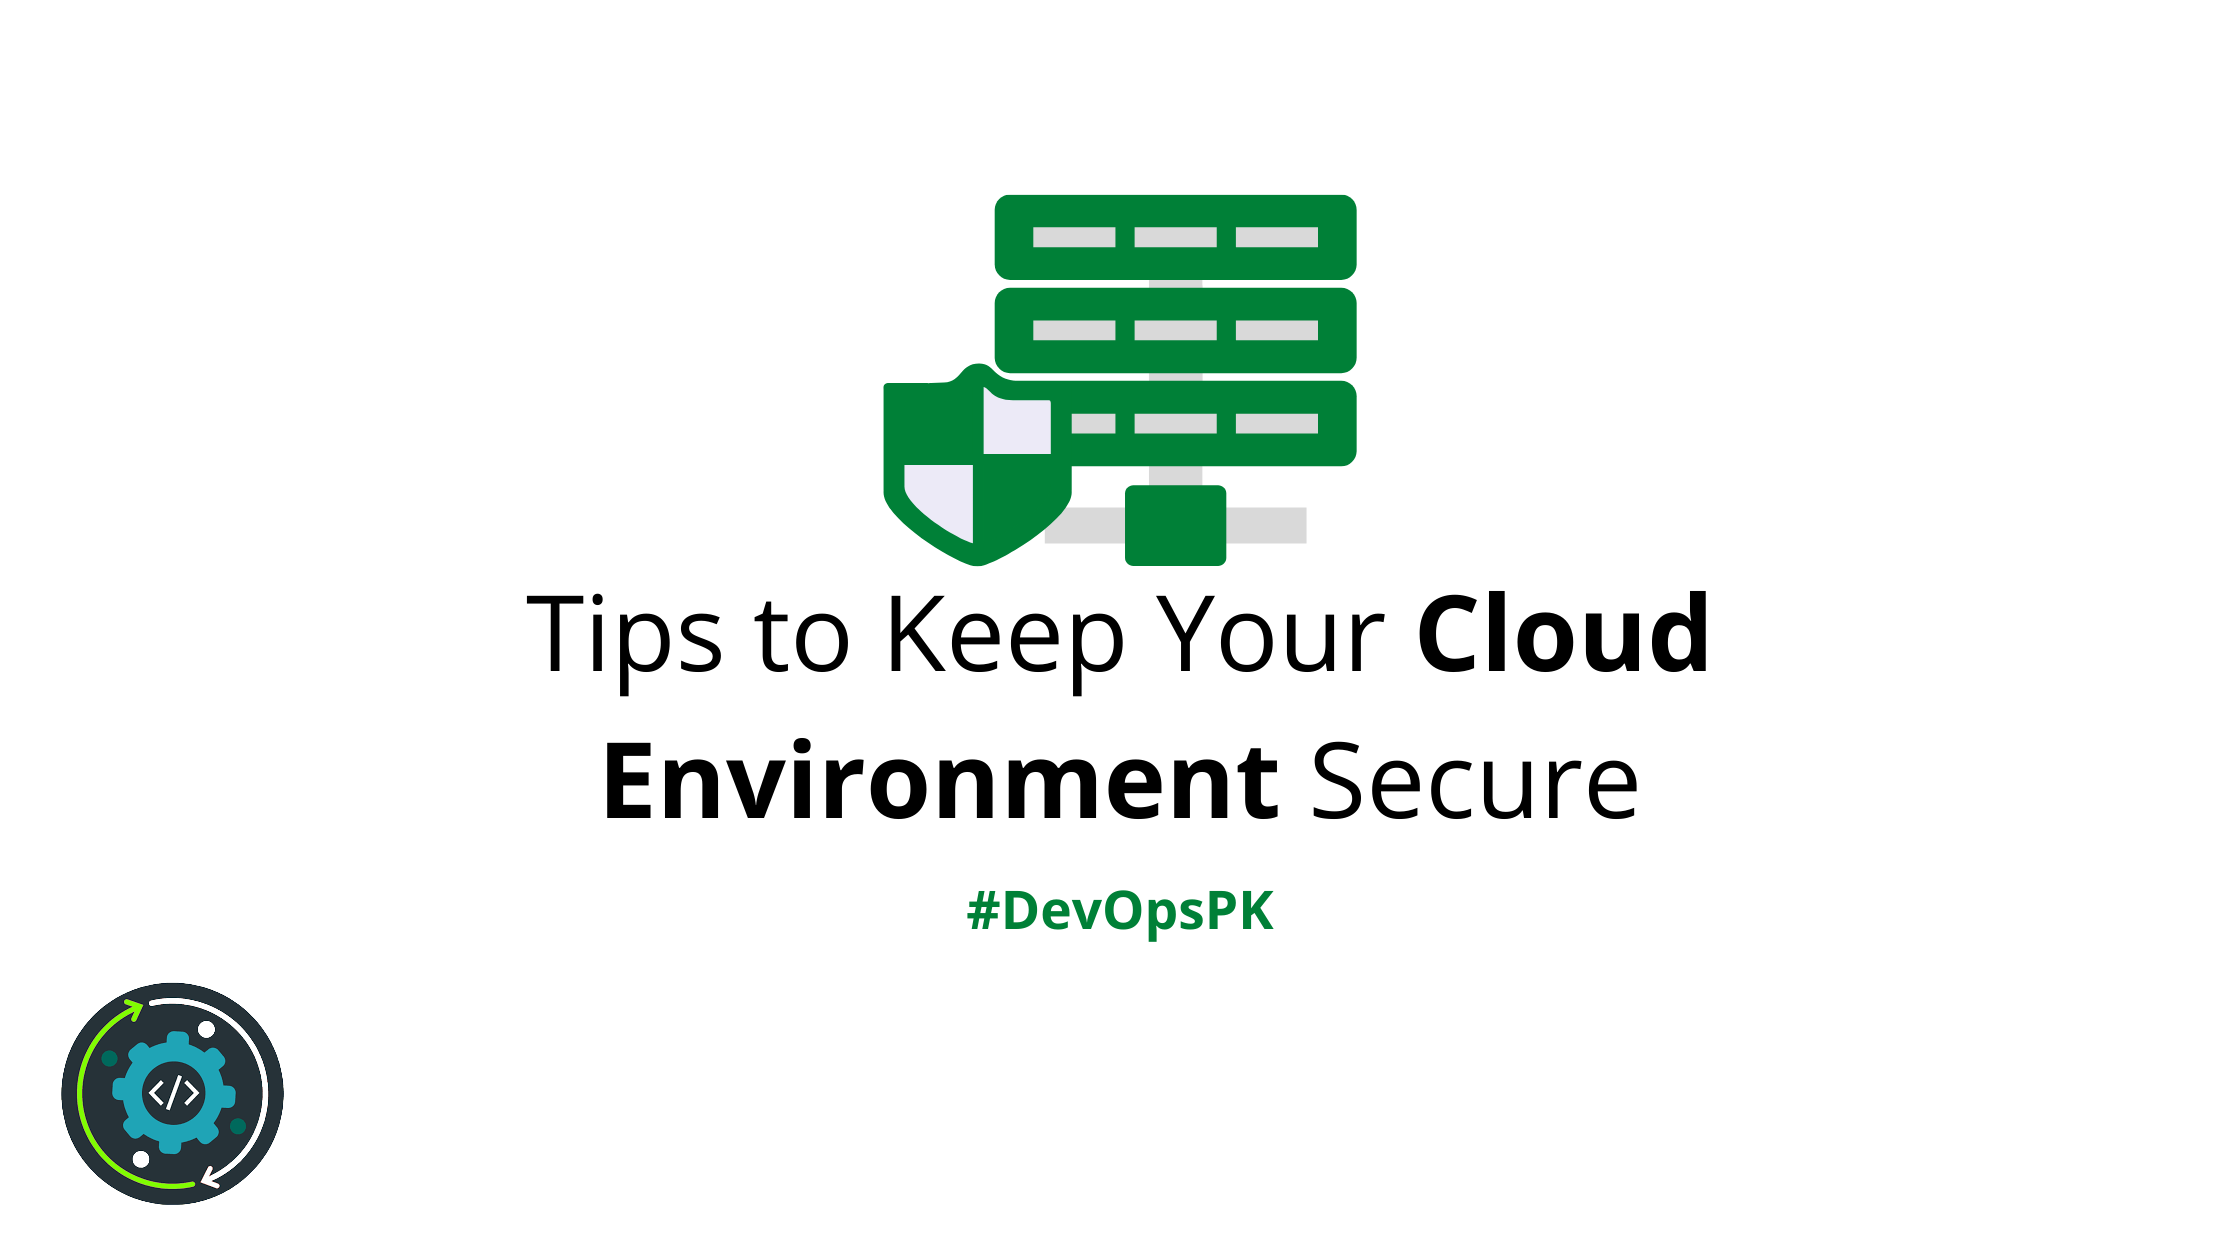 Tips to Keep Your Cloud Environment Secure